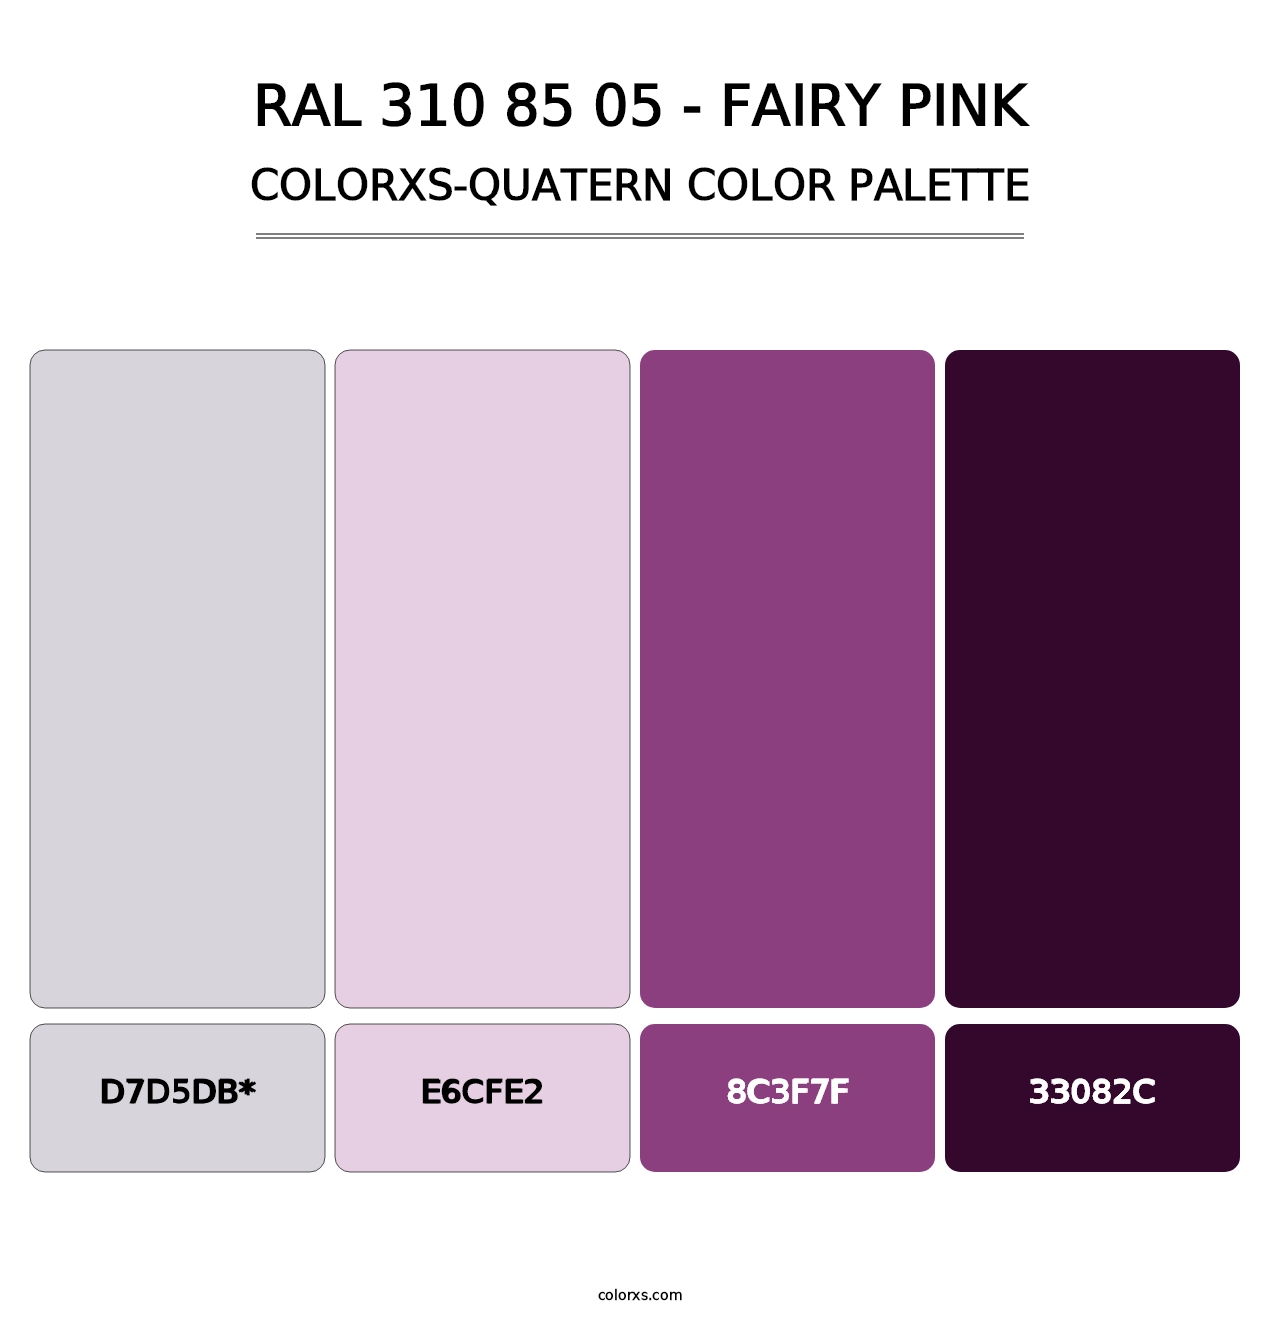 RAL 310 85 05 - Fairy Pink - Colorxs Quatern Palette